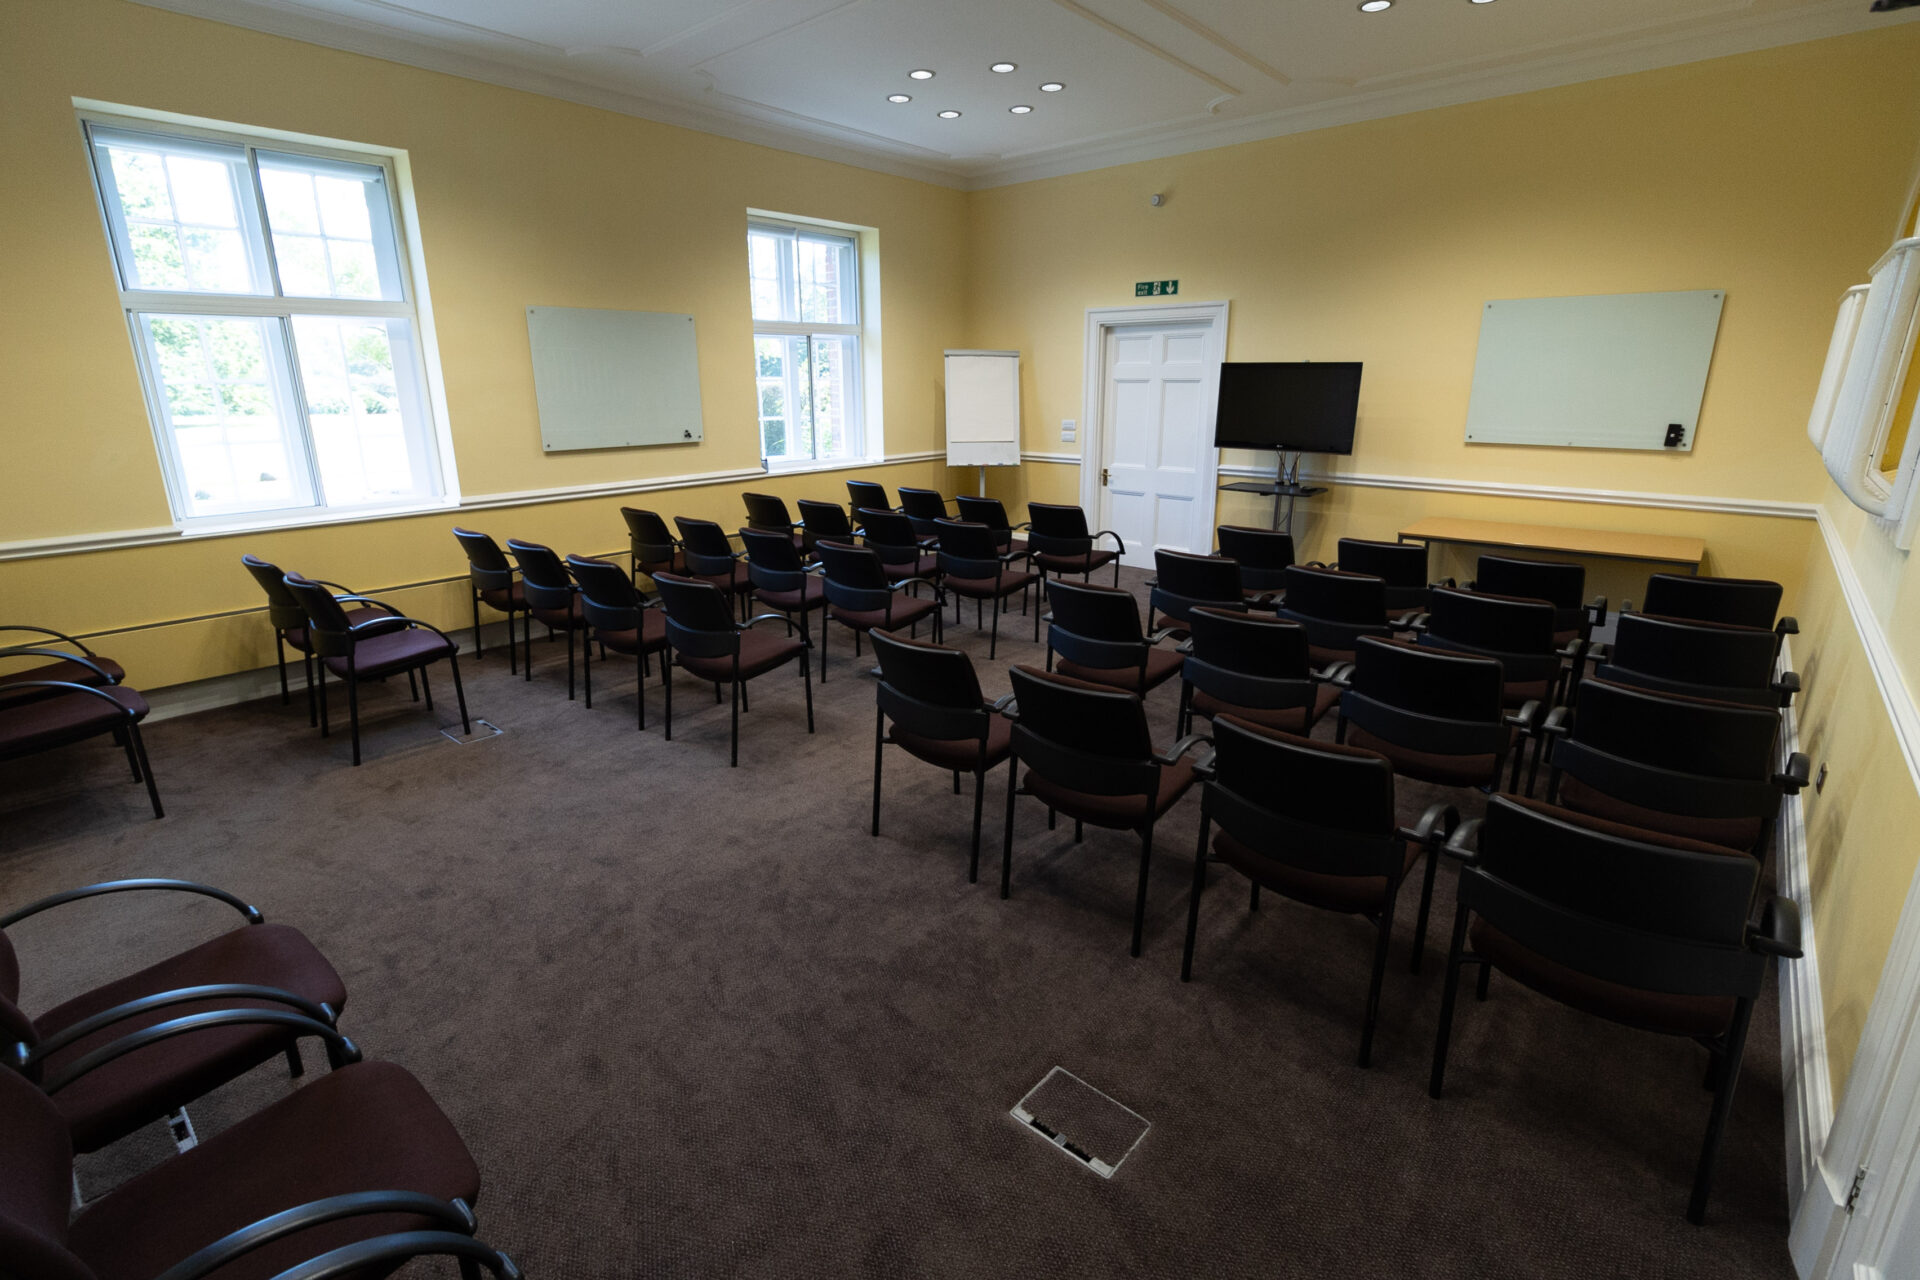 The Greening conference room, laid out in a theatre style to accommodate up to 40 people.